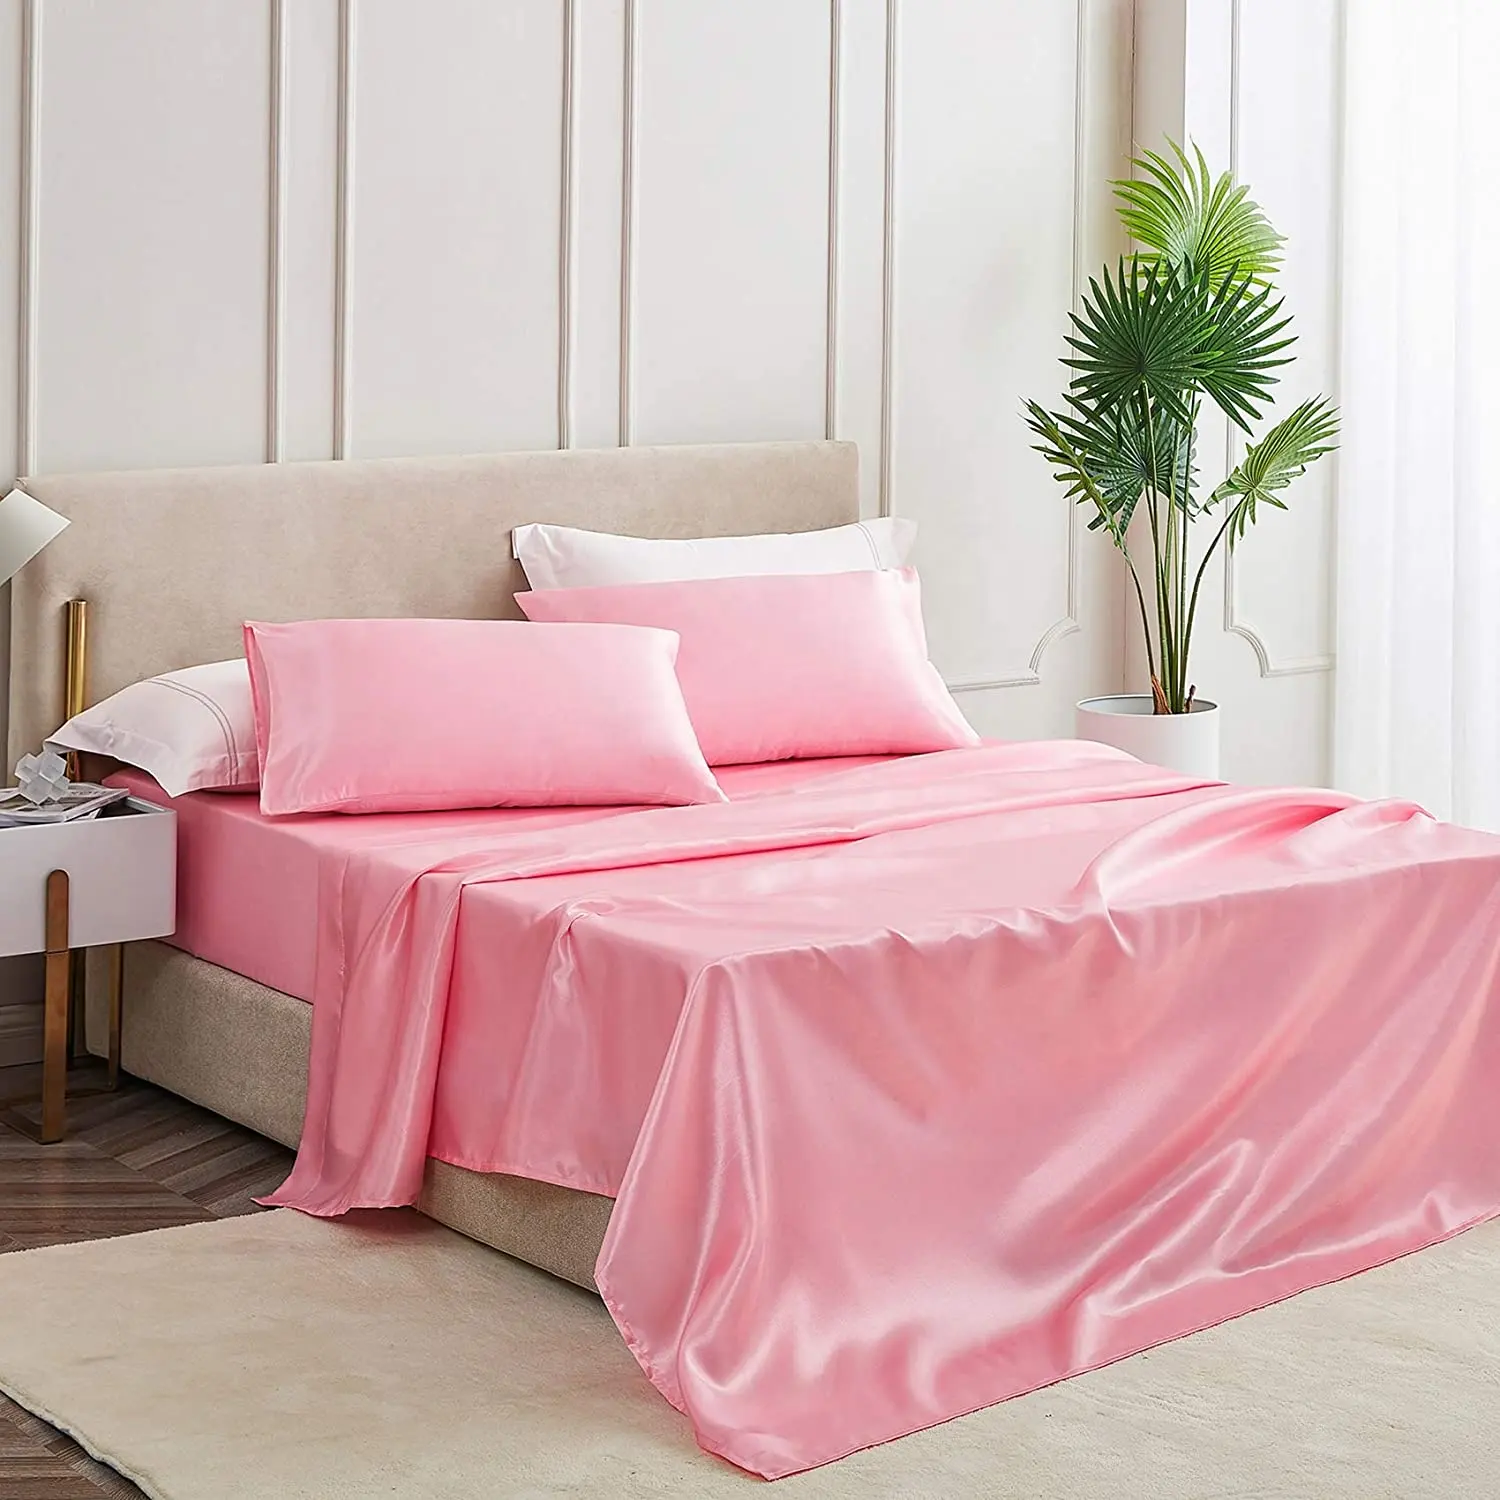 Factory OEM Hot Sale luxury pink color smooth natural cooling 100% silk satin bedding cover set queen size bed sheets